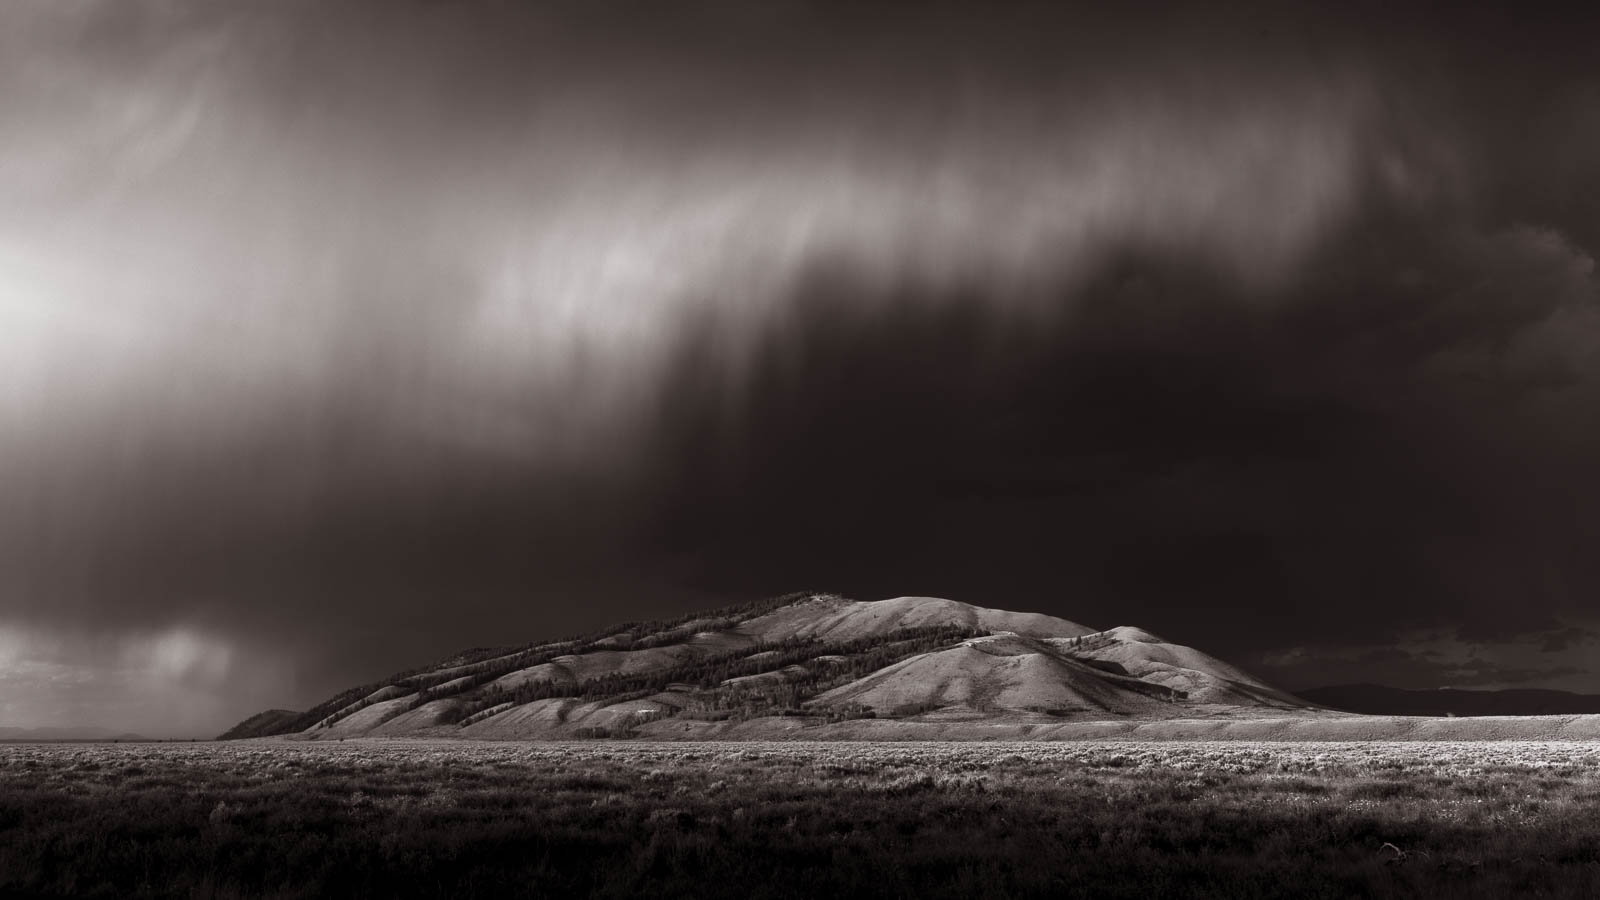 Wyoming, black and white, blacktail butte, clouds, grand teton national park, landscape orientation, monochrome, panorama, storm...